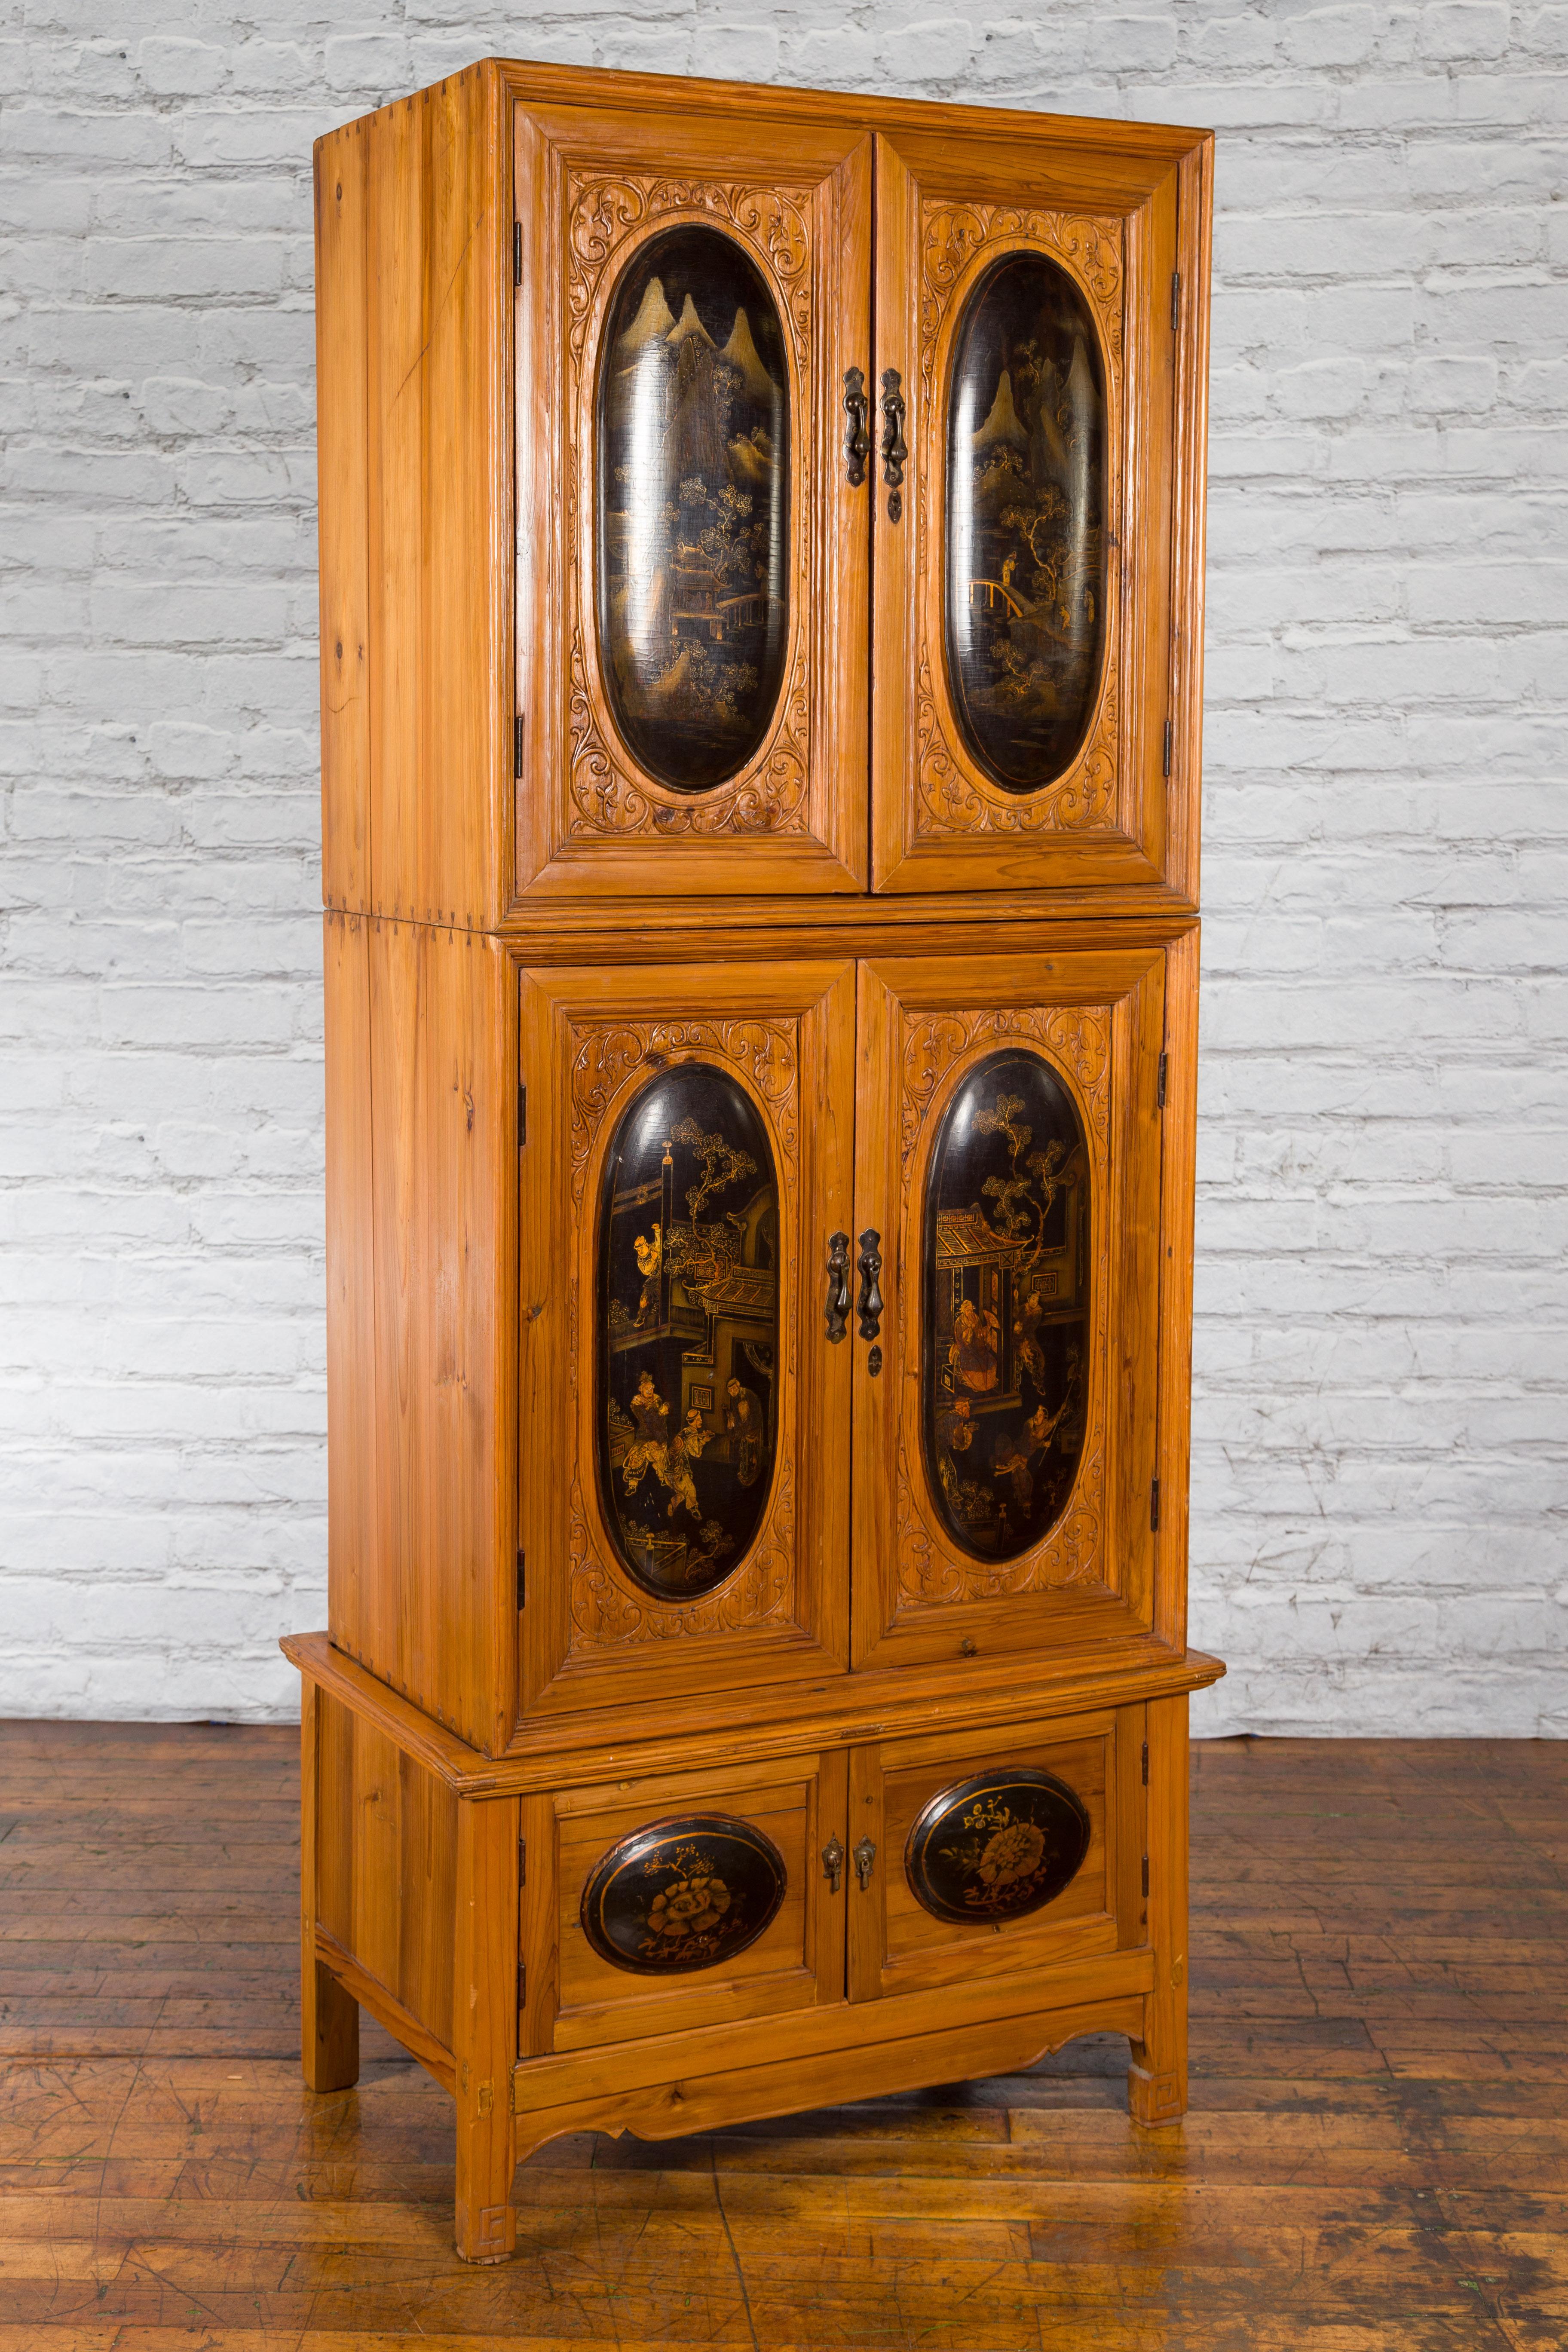 Tall Chinese 19th Century Qing Dynasty Wooden Cabinet with Chinoiserie Panels In Good Condition For Sale In Yonkers, NY